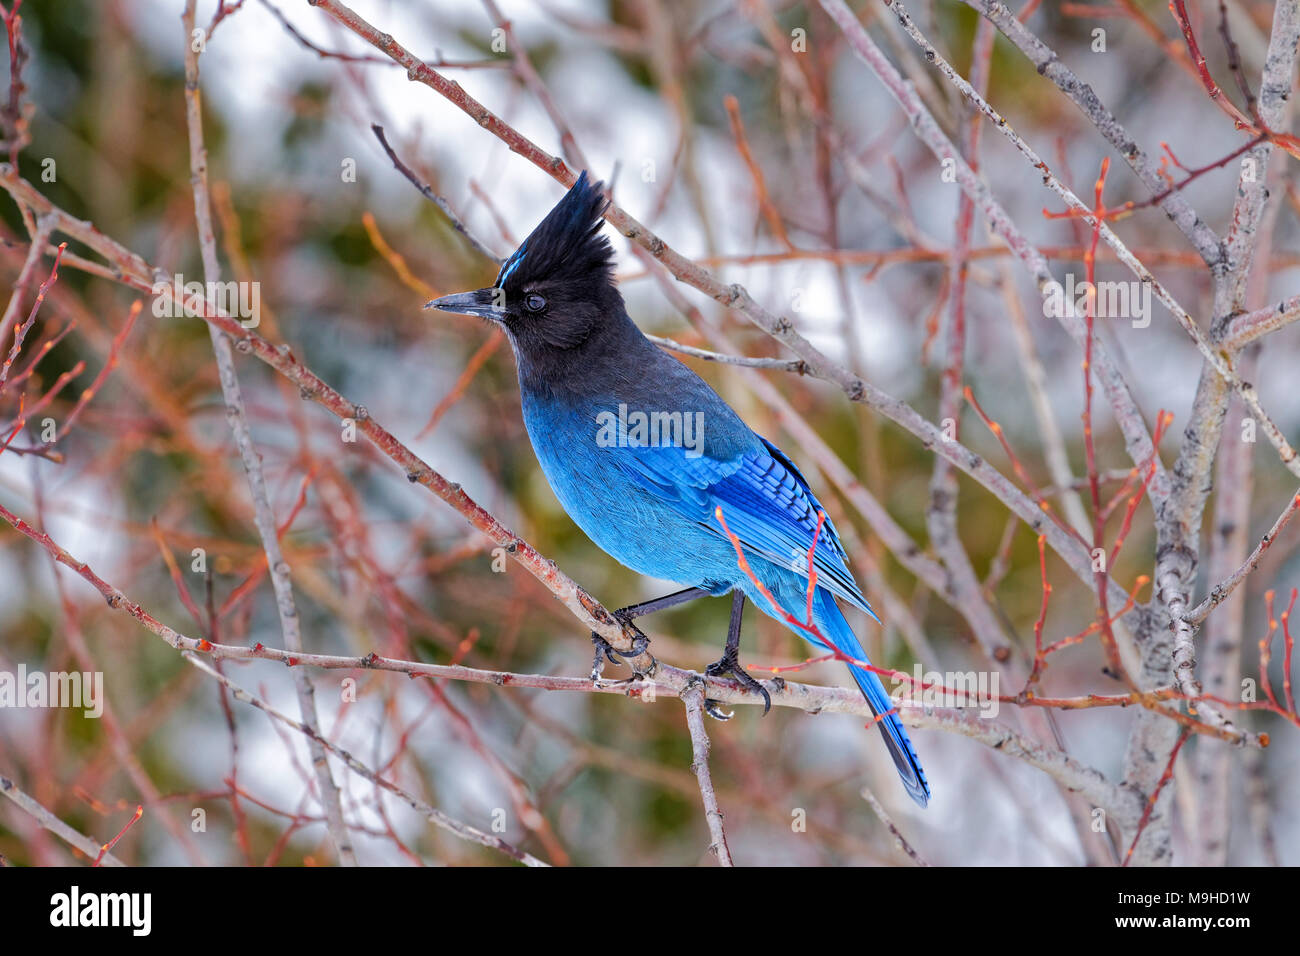 43,160.09760 close-up of a Steller’s Jay bird standing in winter shrub bush, crested head gorgeous beautiful blue and black Stock Photo